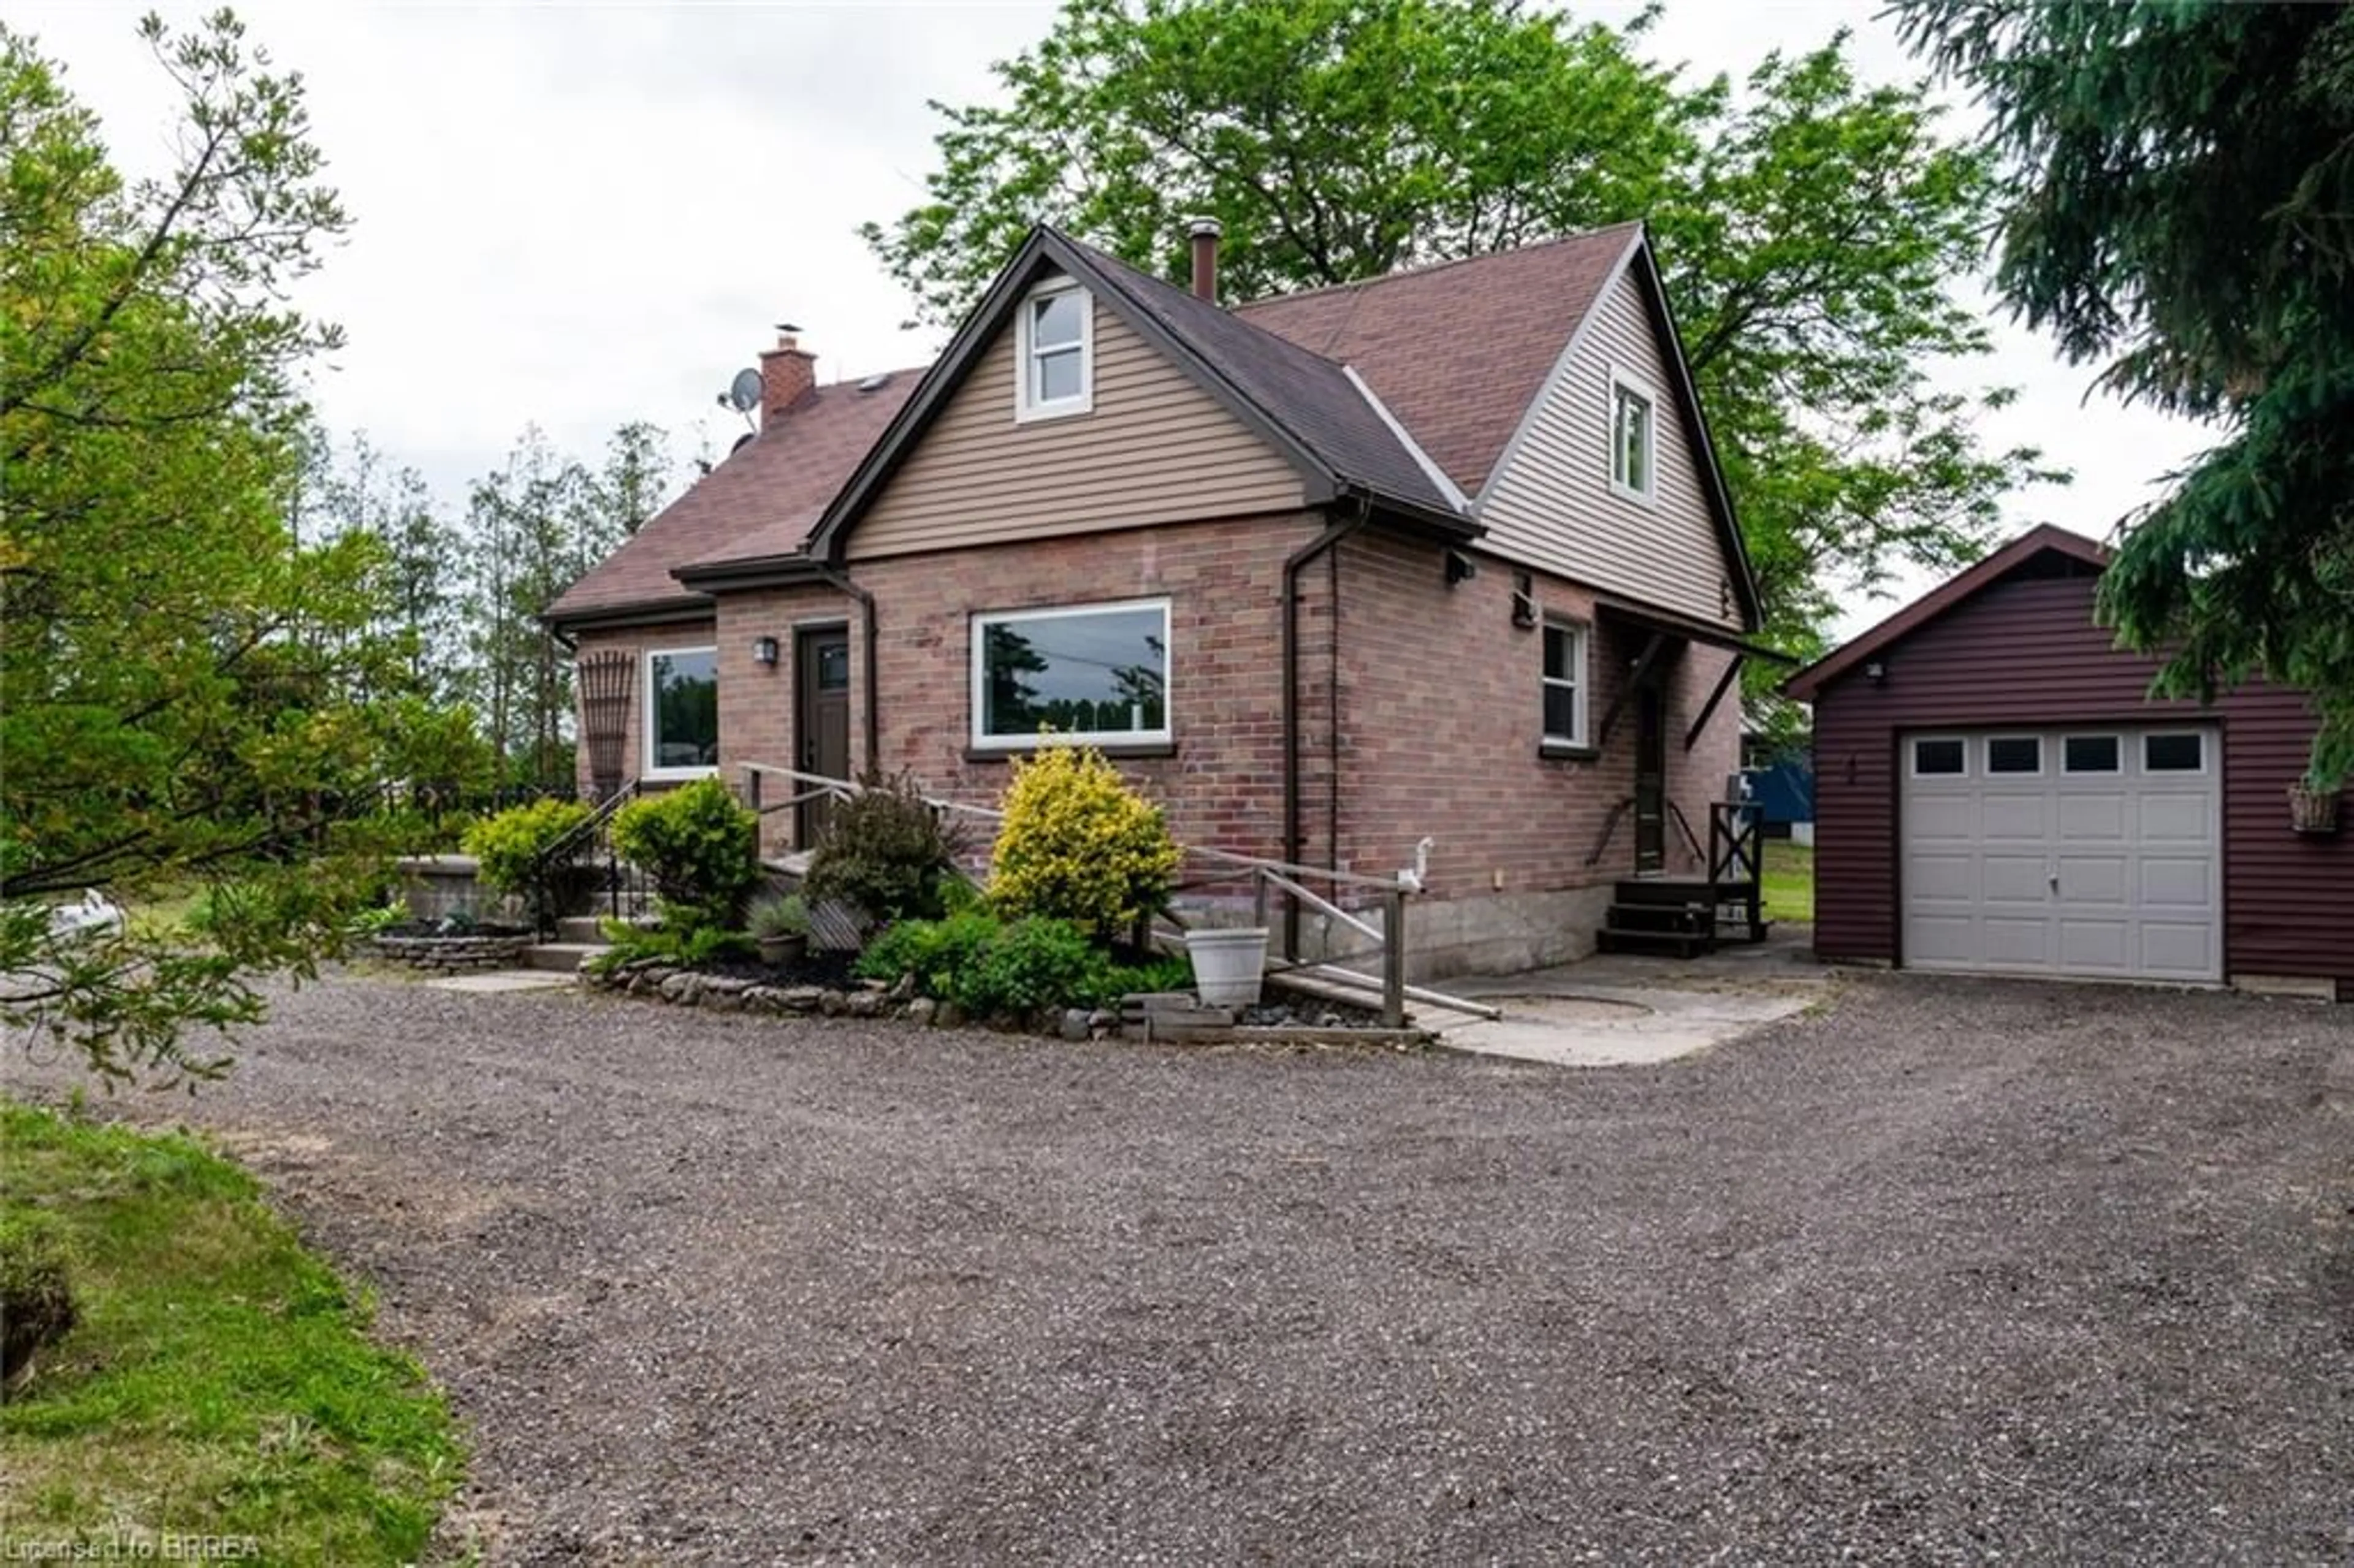 Cottage for 657 Brant Waterloo Rd, South Dumfries Ontario N0B 1E0